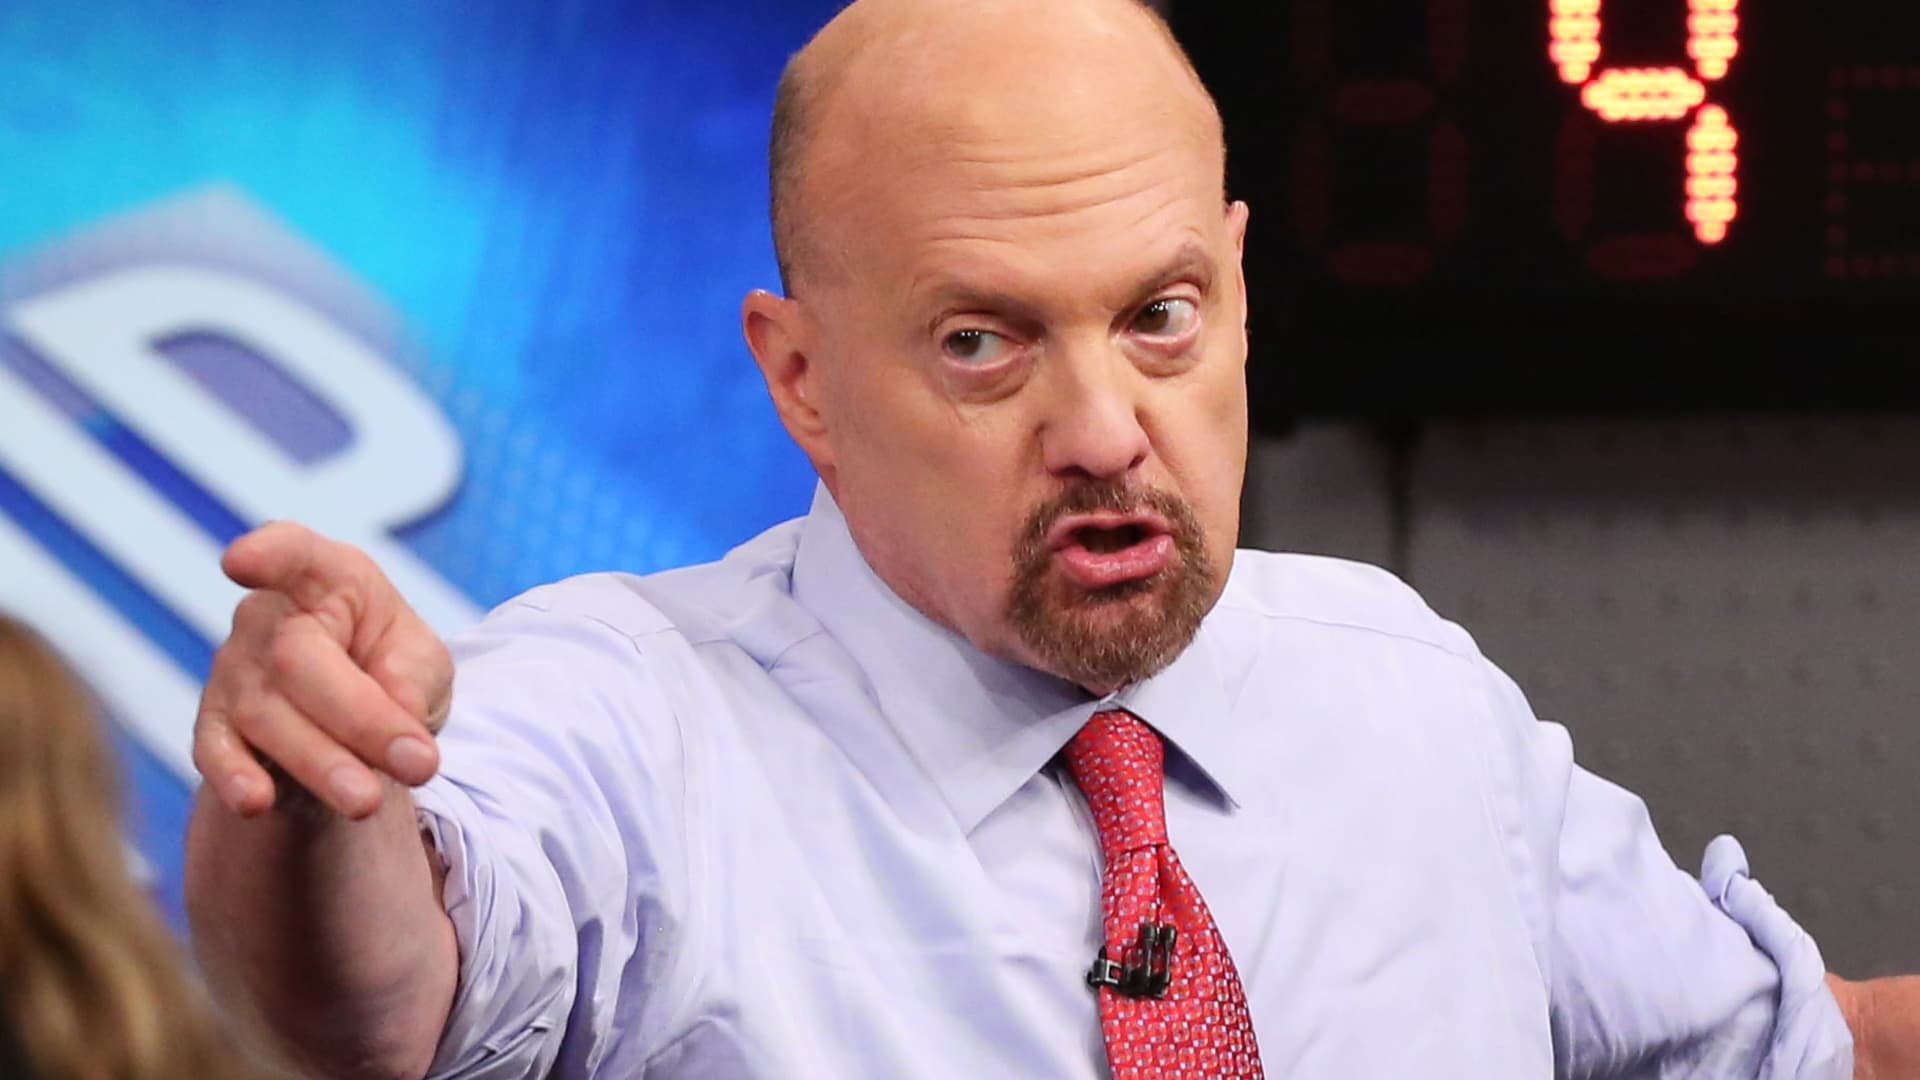 Jim Cramer says to buy the dip on days like Monday: 'It’ll be too late' if you wait for the Fed